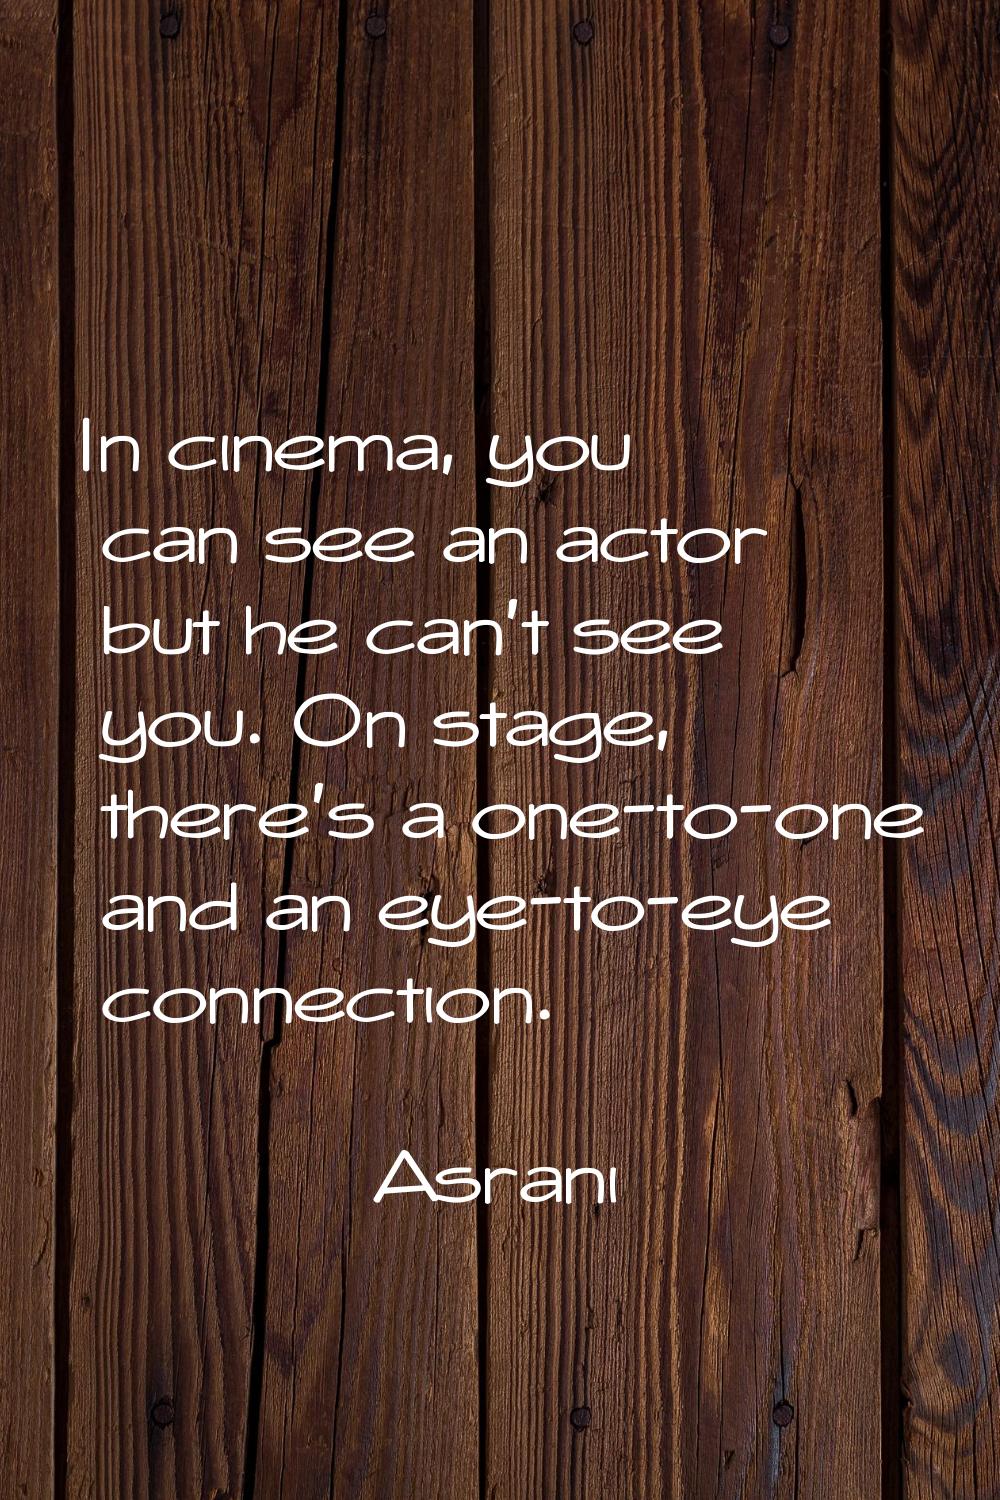 In cinema, you can see an actor but he can't see you. On stage, there's a one-to-one and an eye-to-